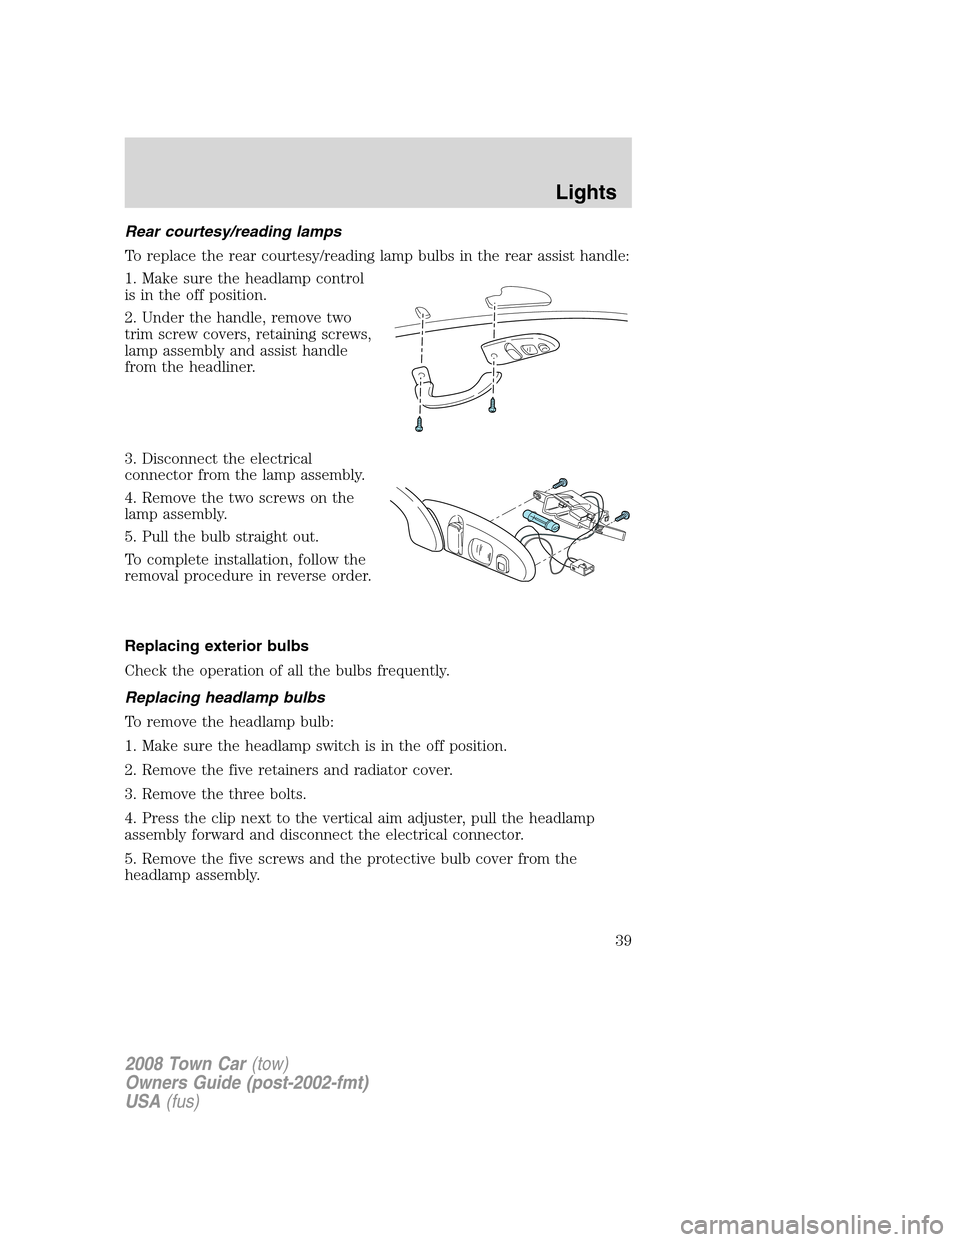 LINCOLN TOWN CAR 2008 Owners Guide Rear courtesy/reading lamps
To replace the rear courtesy/reading lamp bulbs in the rear assist handle:
1. Make sure the headlamp control
is in the off position.
2. Under the handle, remove two
trim sc